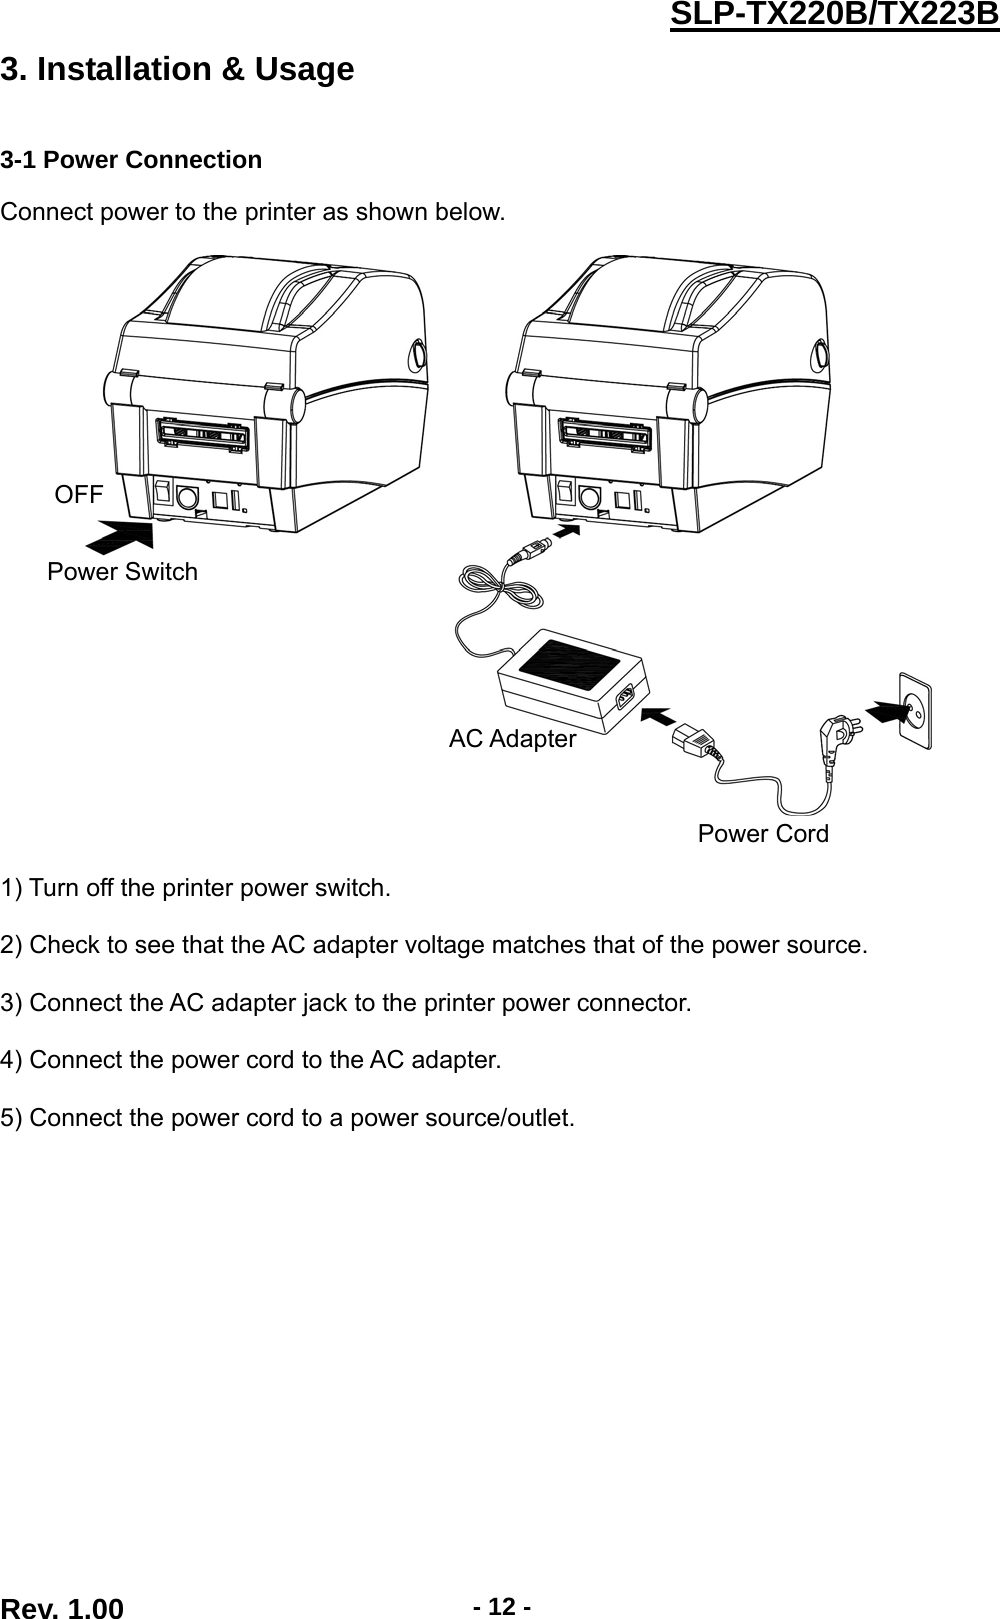  Rev. 1.00  - 12 -SLP-TX220B/TX223B3. Installation &amp; Usage   3-1 Power Connection  Connect power to the printer as shown below.       1) Turn off the printer power switch.  2) Check to see that the AC adapter voltage matches that of the power source.  3) Connect the AC adapter jack to the printer power connector.  4) Connect the power cord to the AC adapter.  5) Connect the power cord to a power source/outlet. OFF Power Switch Power Cord AC Adapter